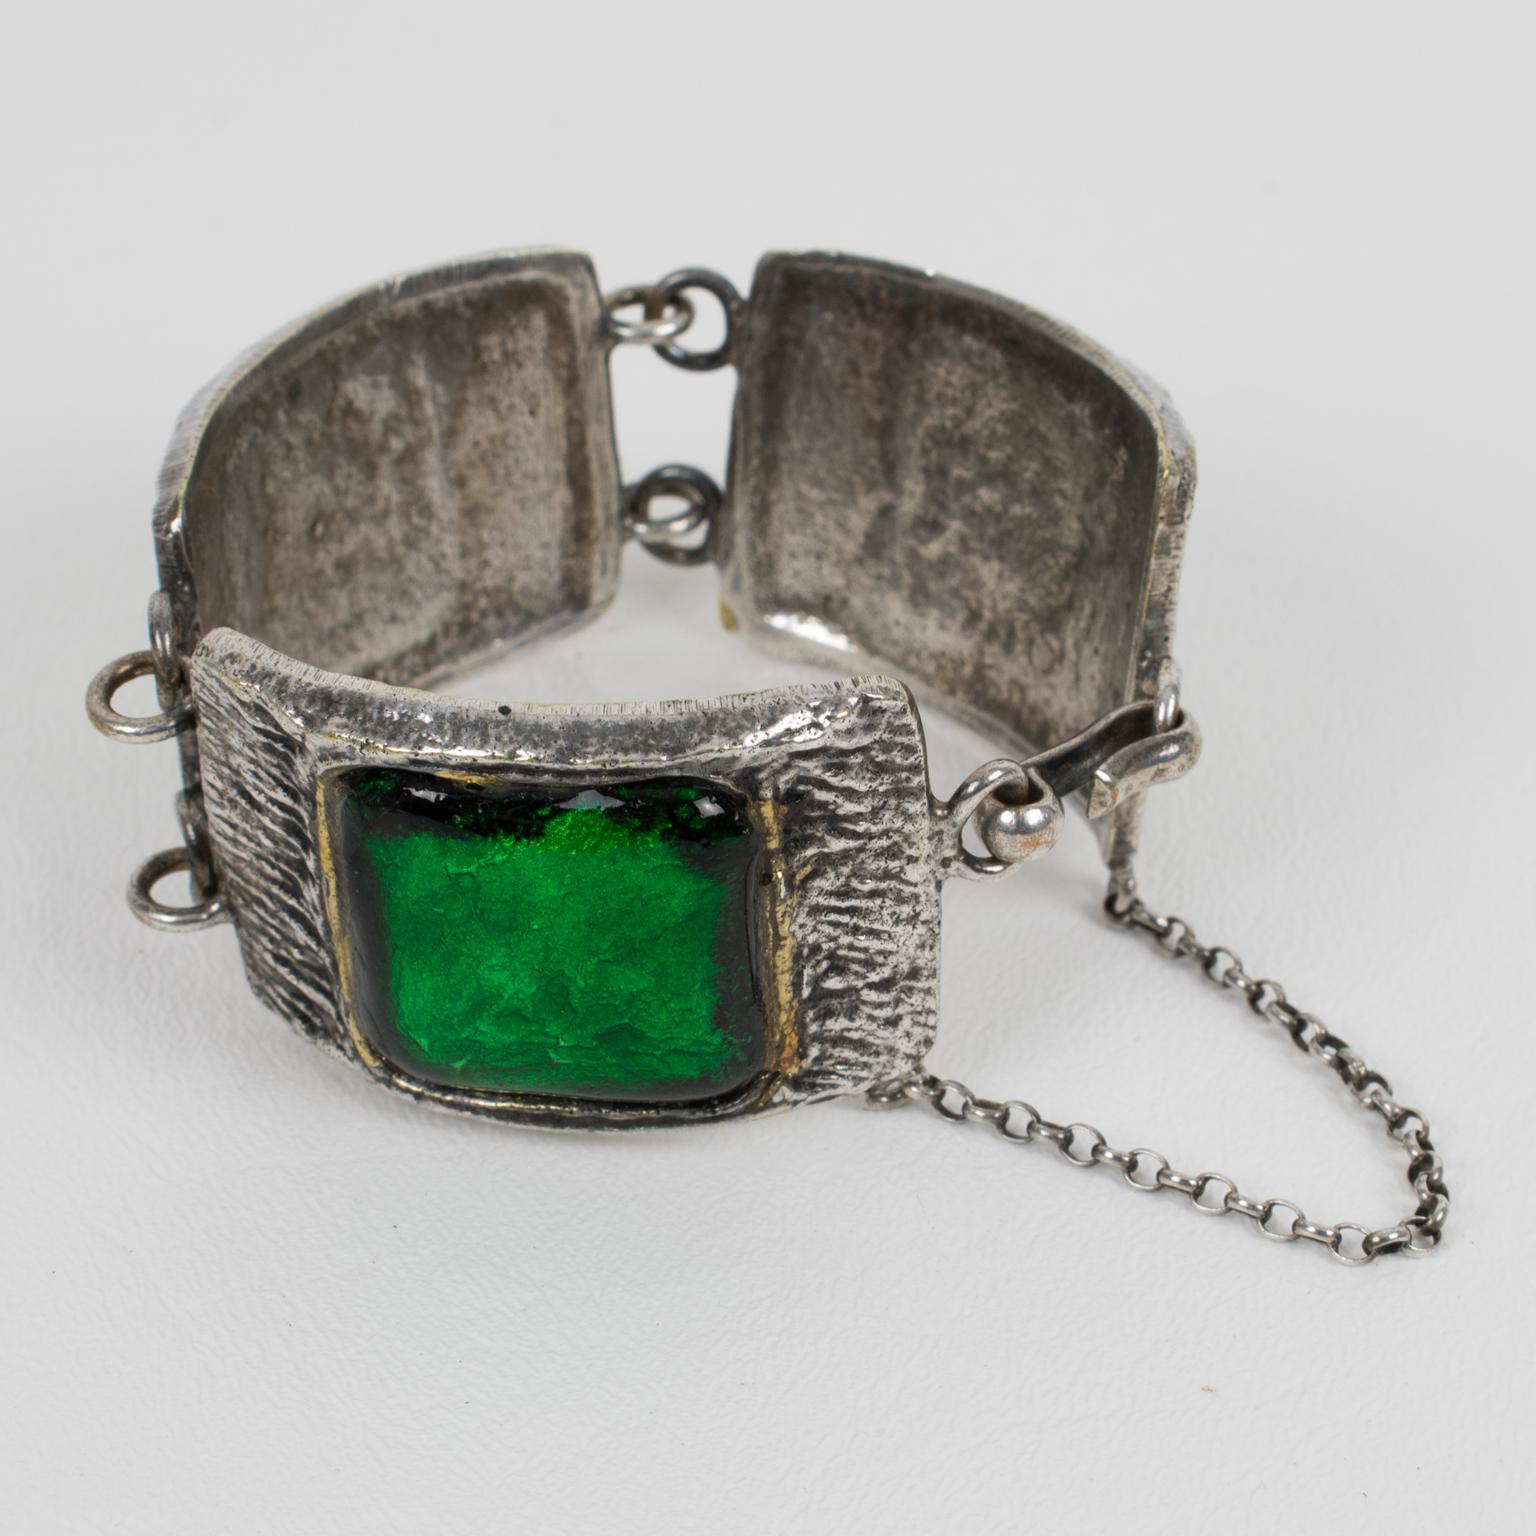 French artist Willy designed this elegant Mid-Century link bracelet in the 1950s. The piece features geometric silvered bronze hand-made shaped elements topped with thick poured glass cabochons in emerald green color with a glittering textured